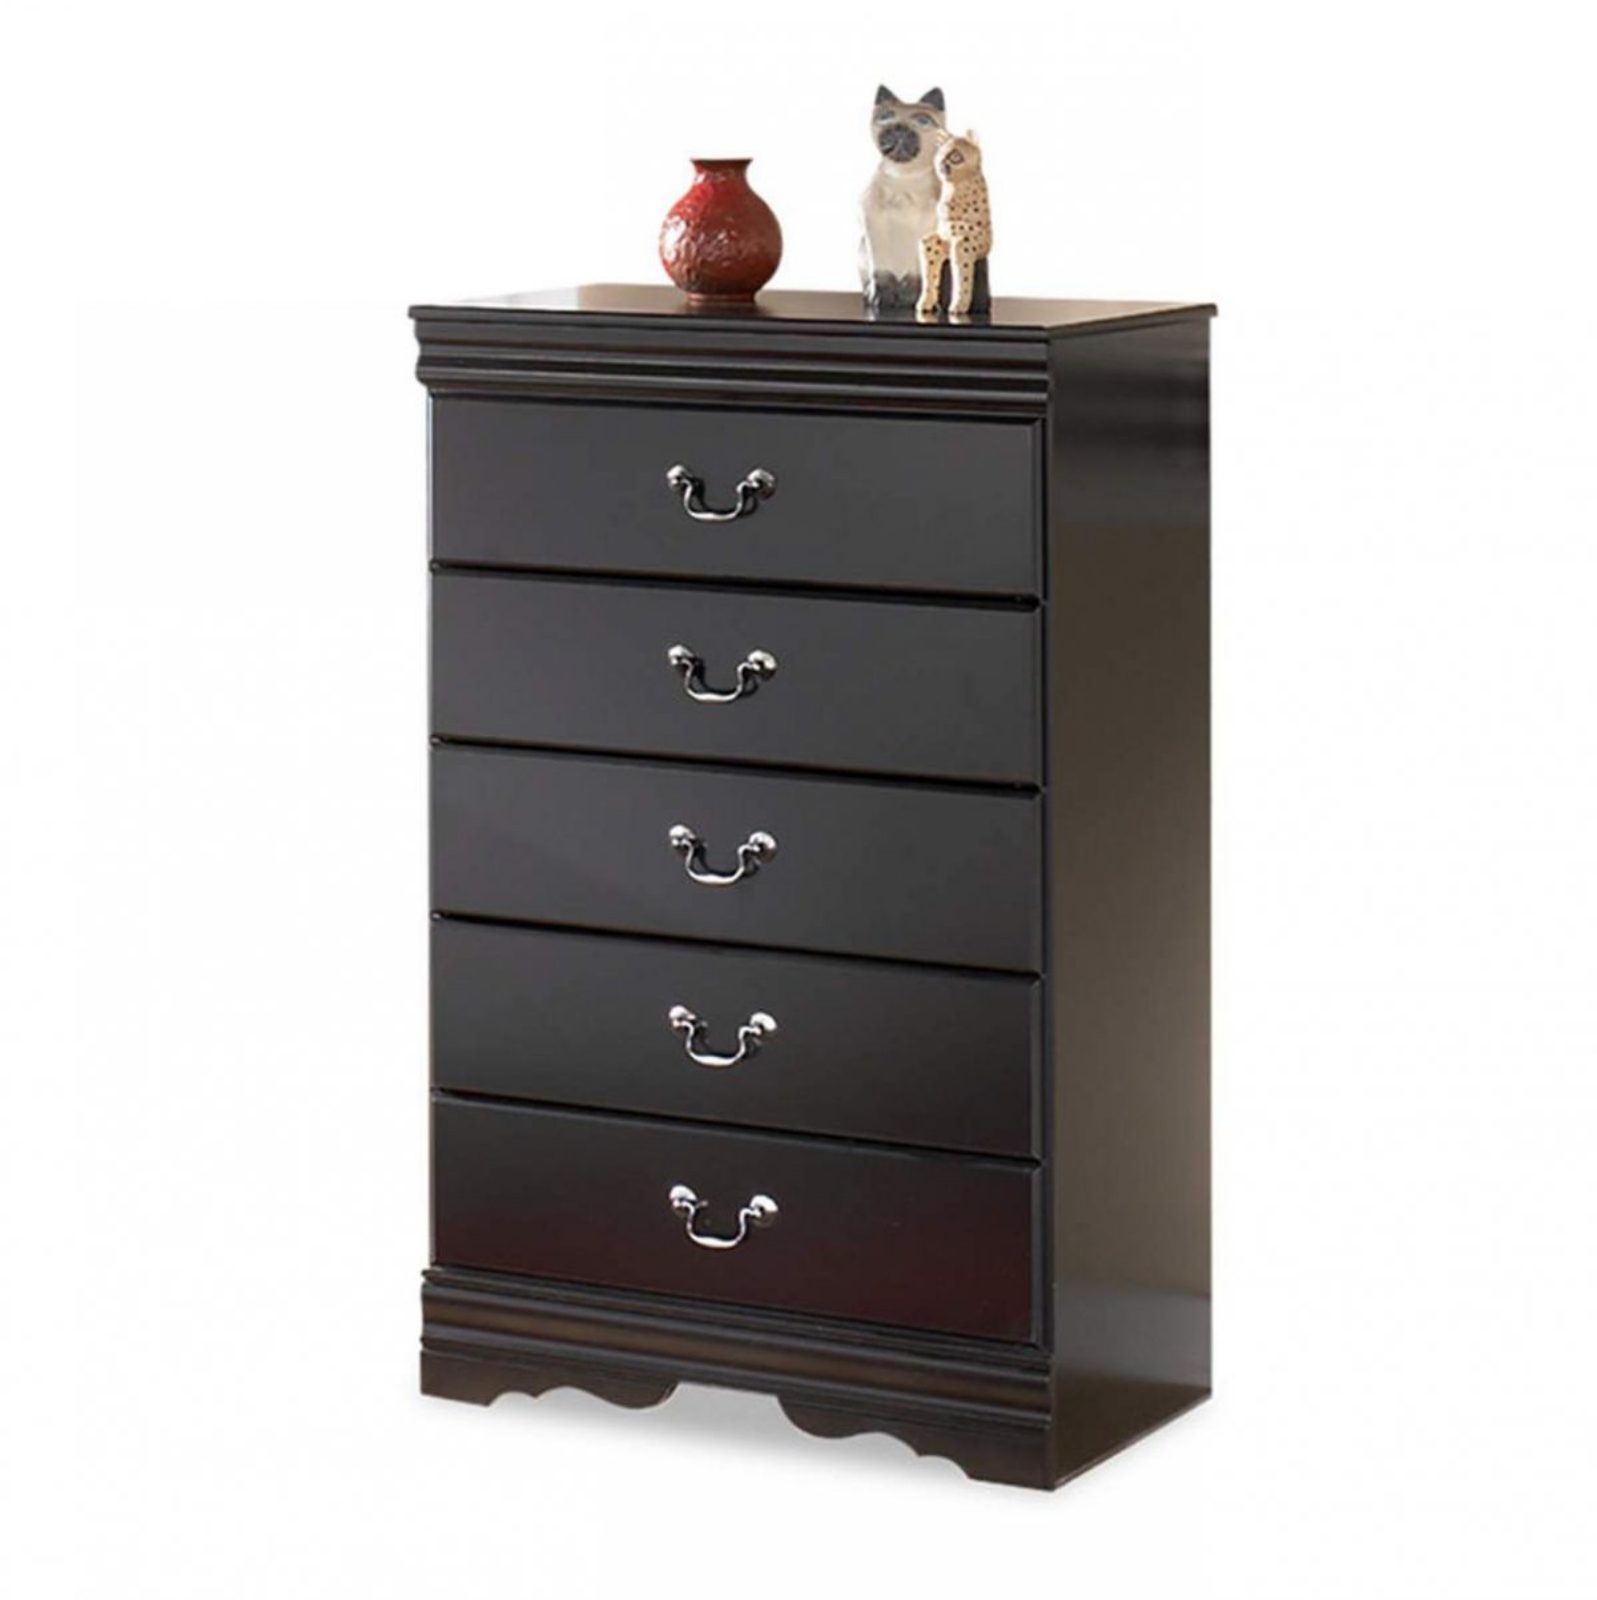 Picture of Huey Vineyard Chest of Drawers